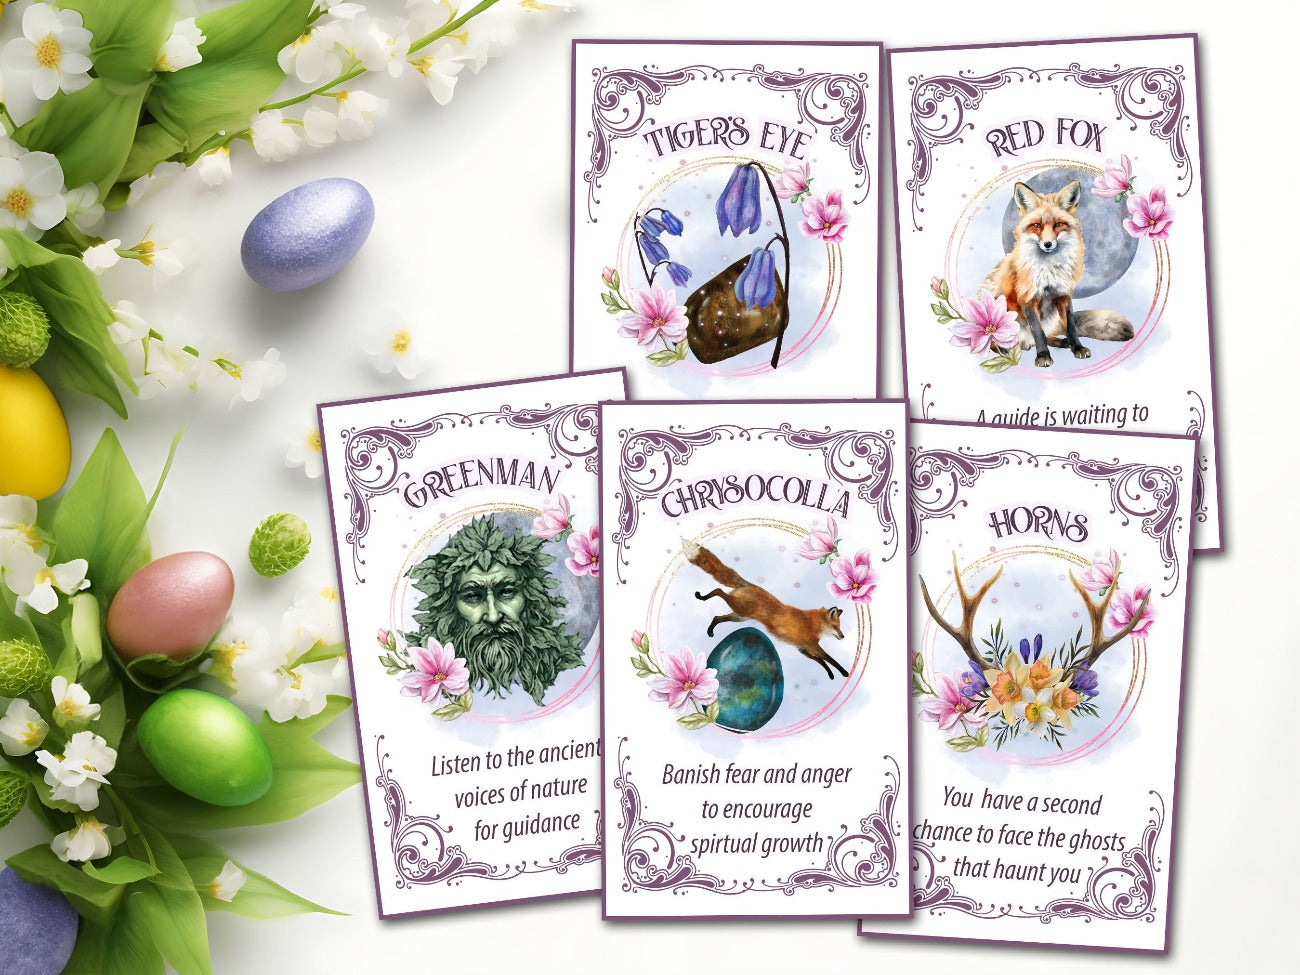 OSTARA ORACLE CARDS, Printable Tarot Messages, Tigers Eye, Red Fox, Greenman, Chrysocolla, and Horns Cards - Morgana Magick Spell